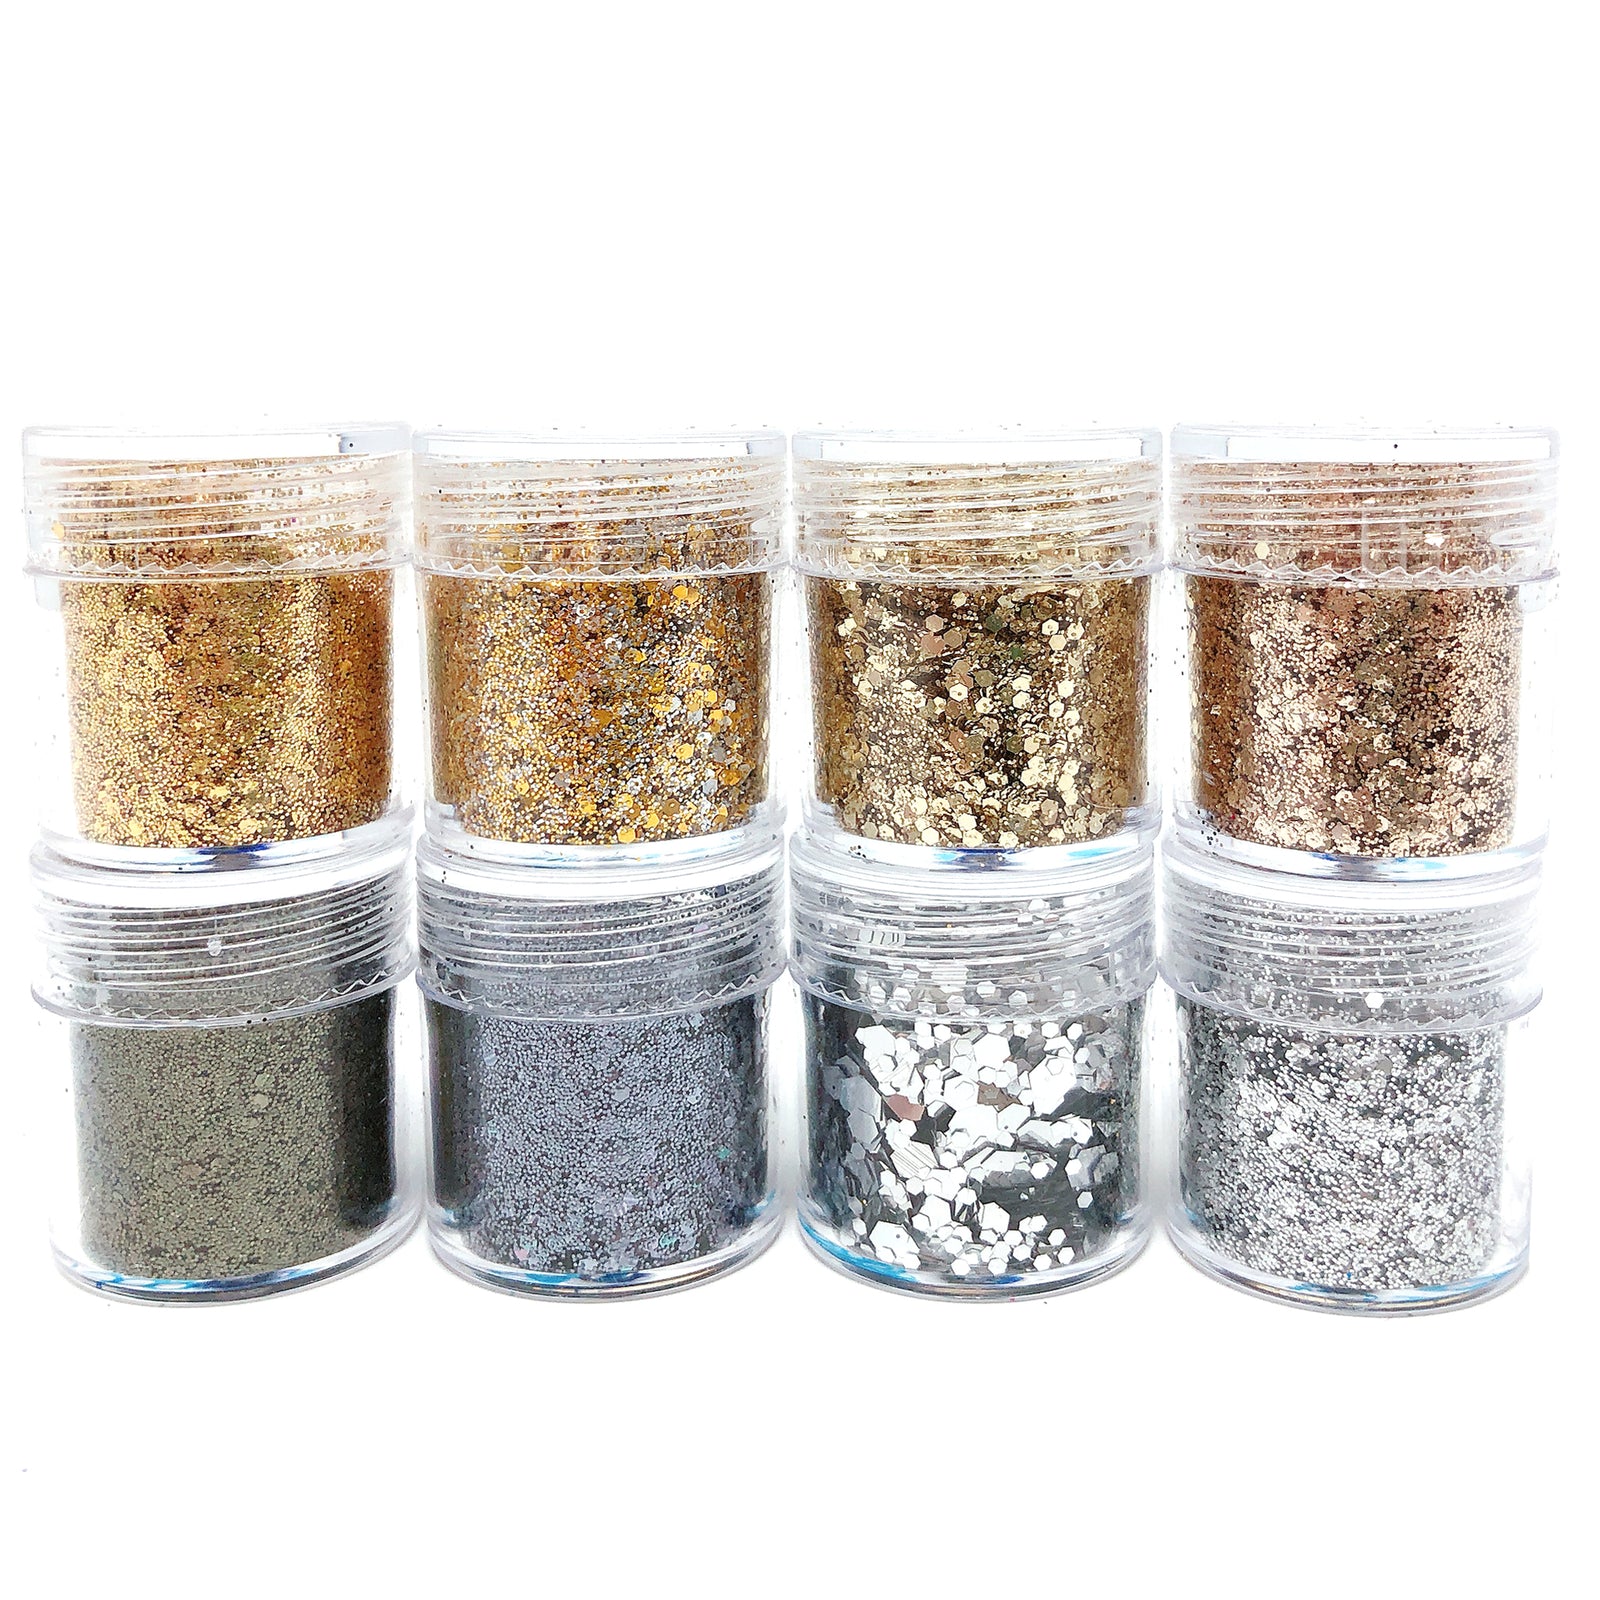 Wrapables Chunky Glitter for Hair Face Makeup Nail Art Decoration (8 Colors), Gold & Silver